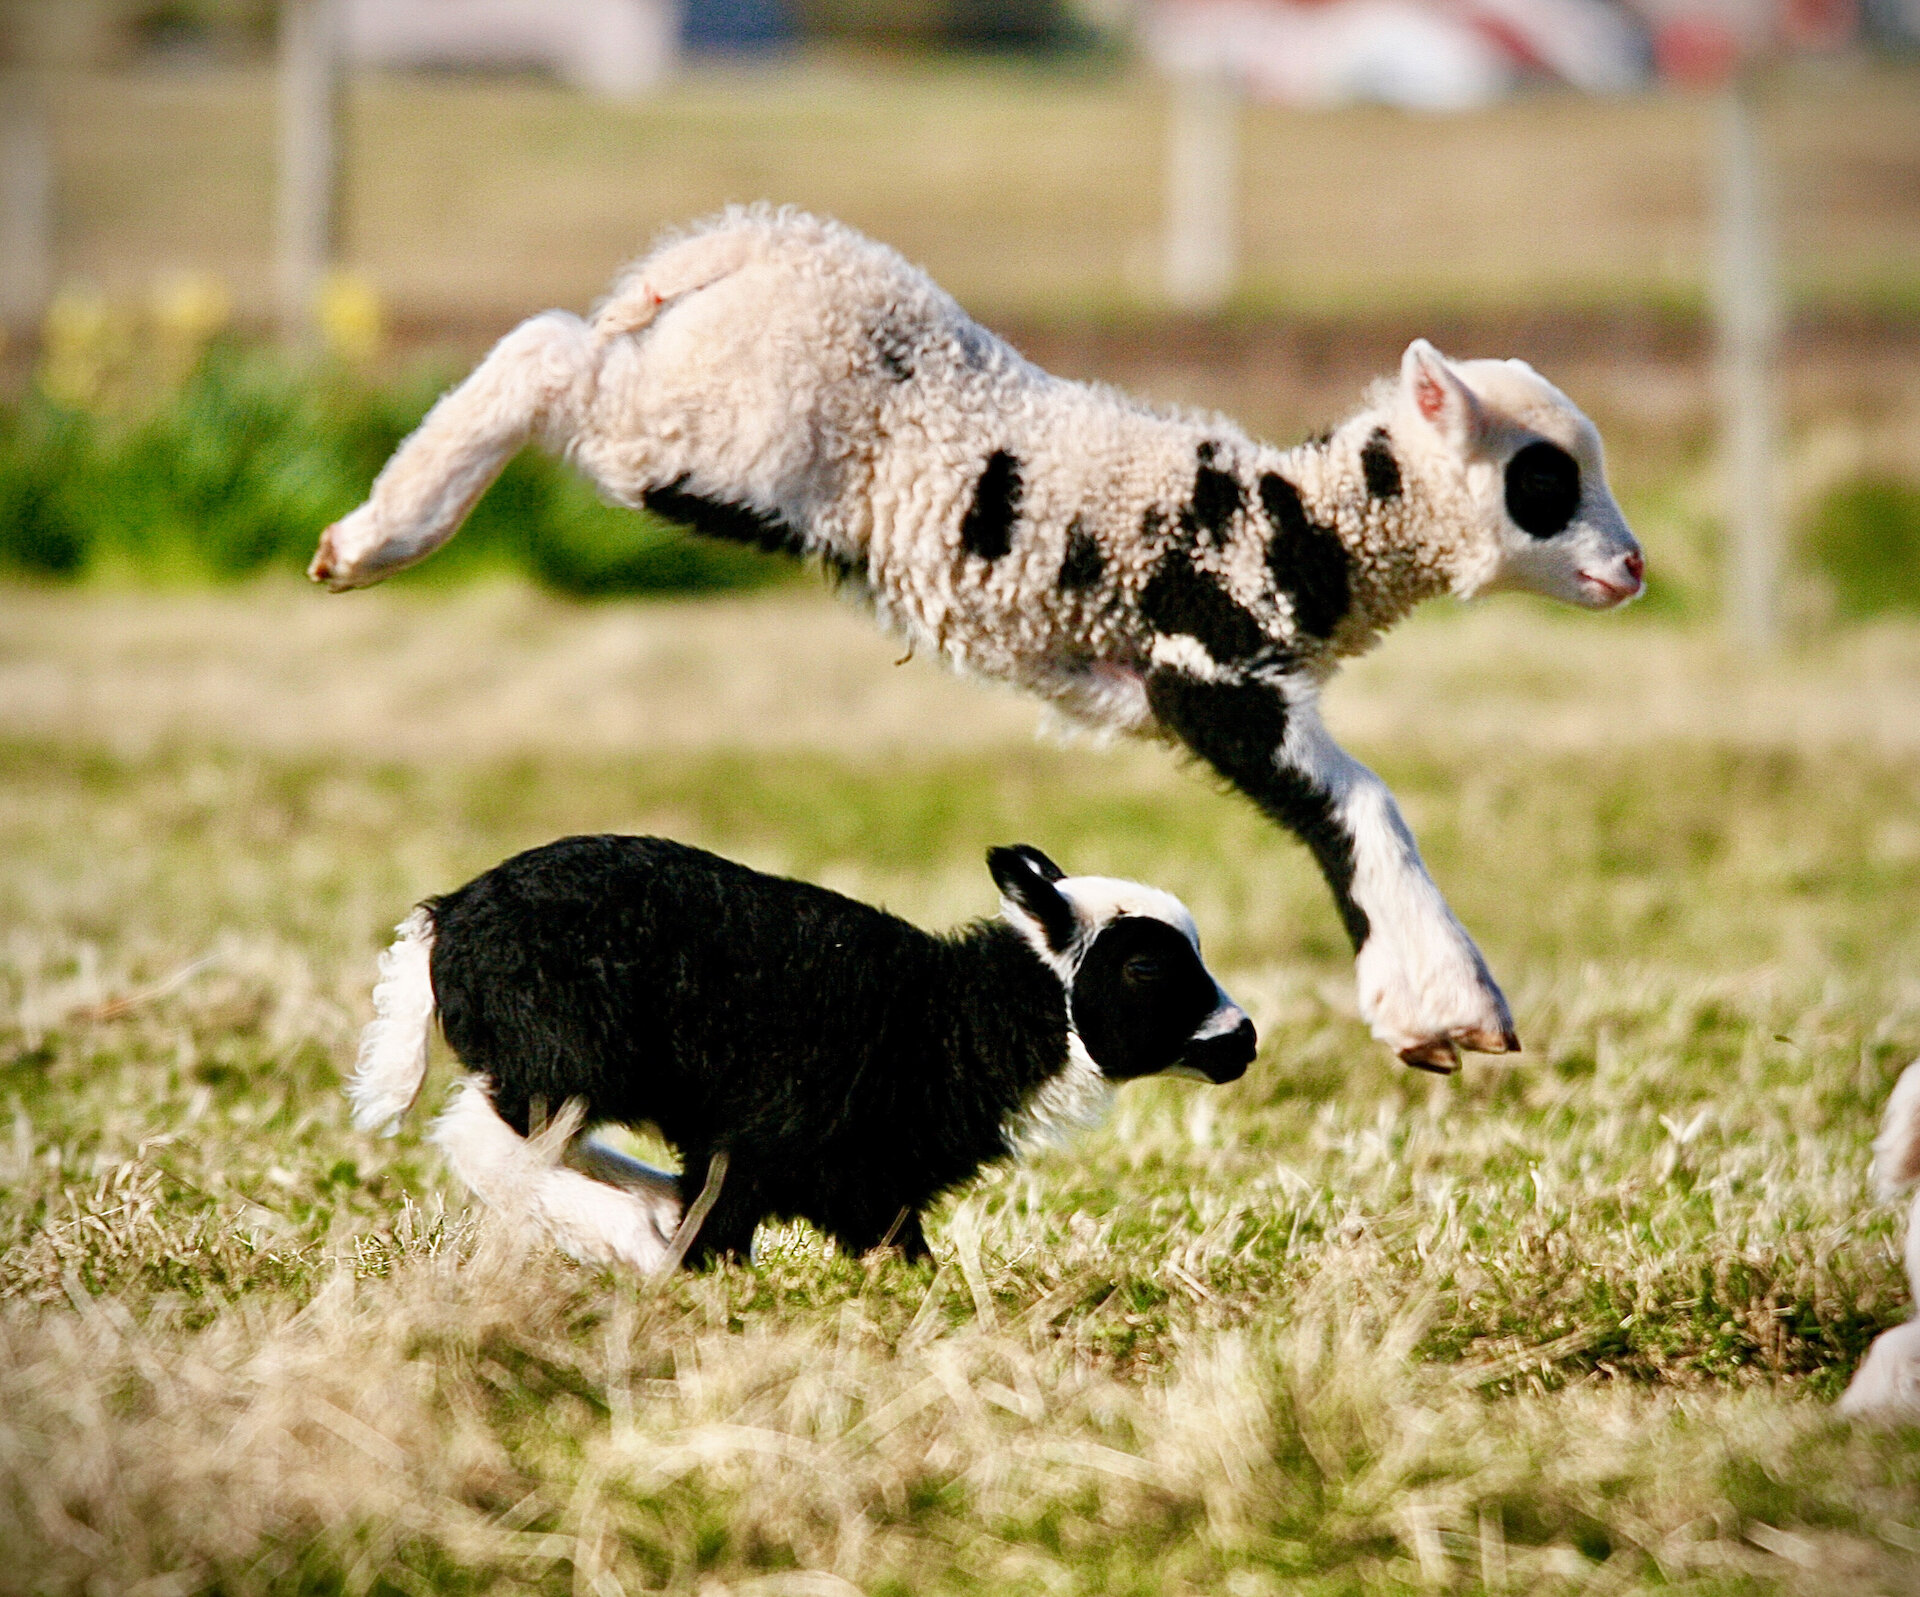 Gambolling lambs are one of the ubiquitous sights of spring in Shetland.